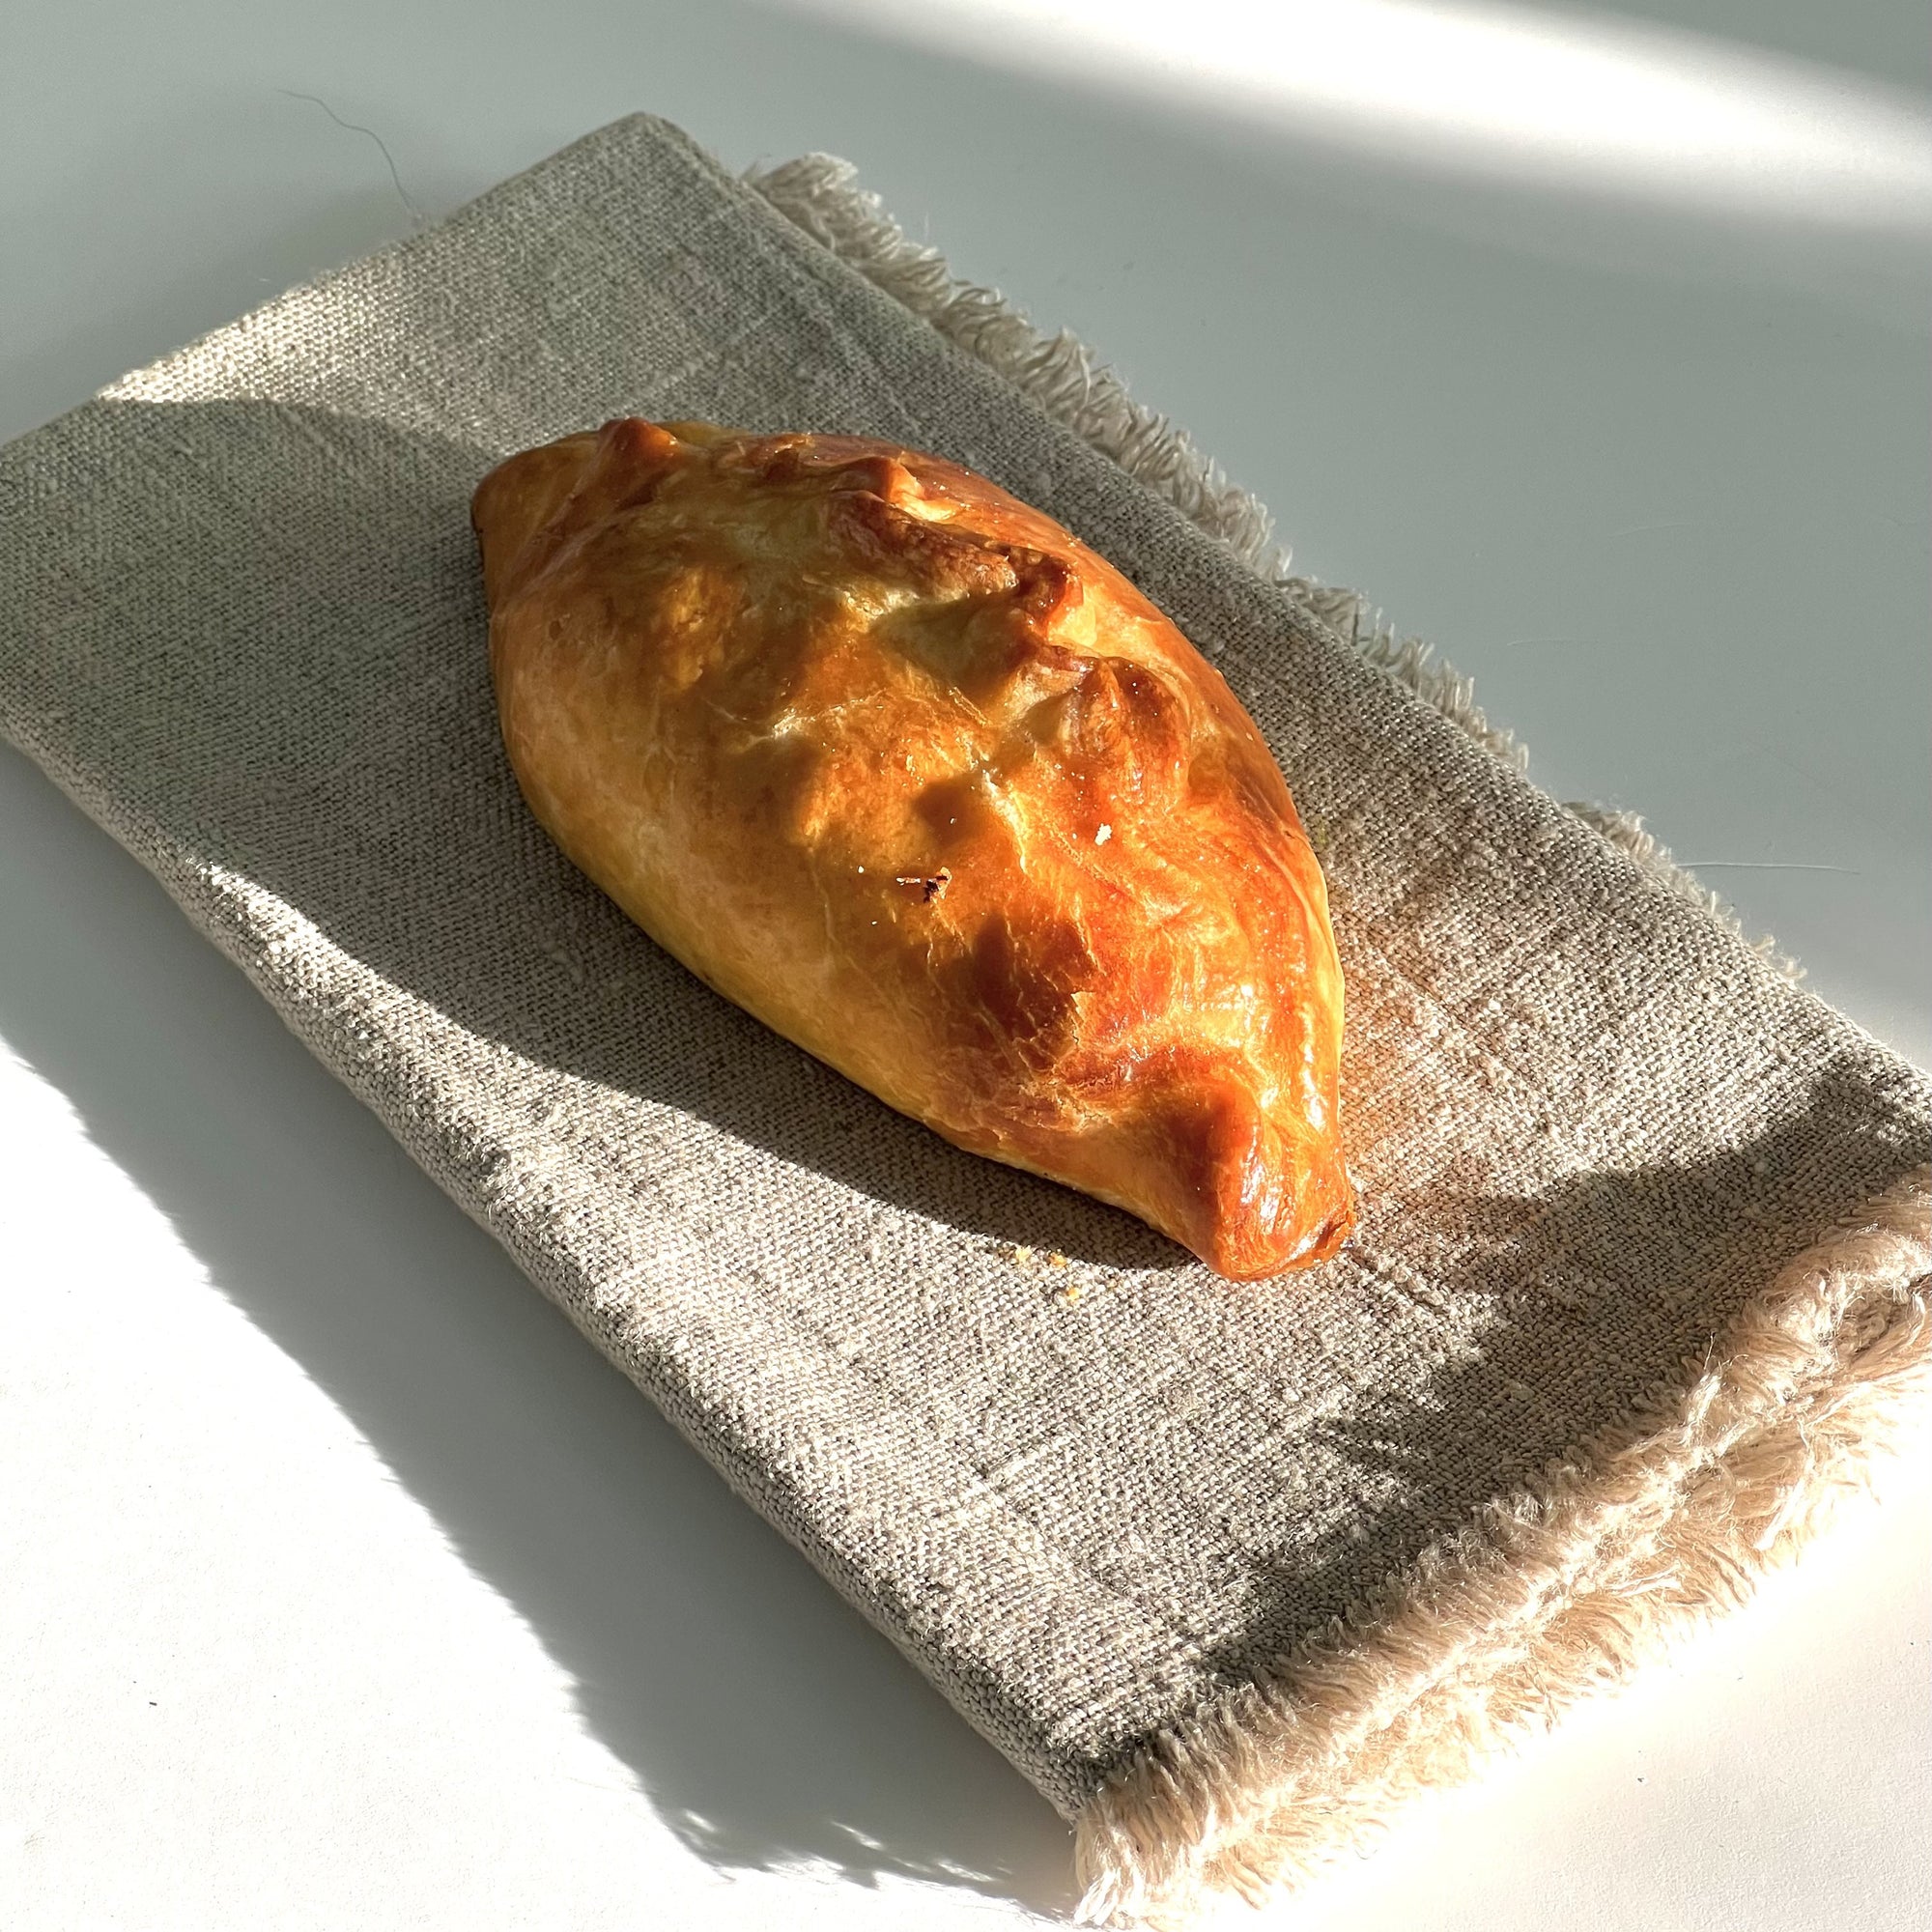 Spiced Autumn Vegetable Pasty